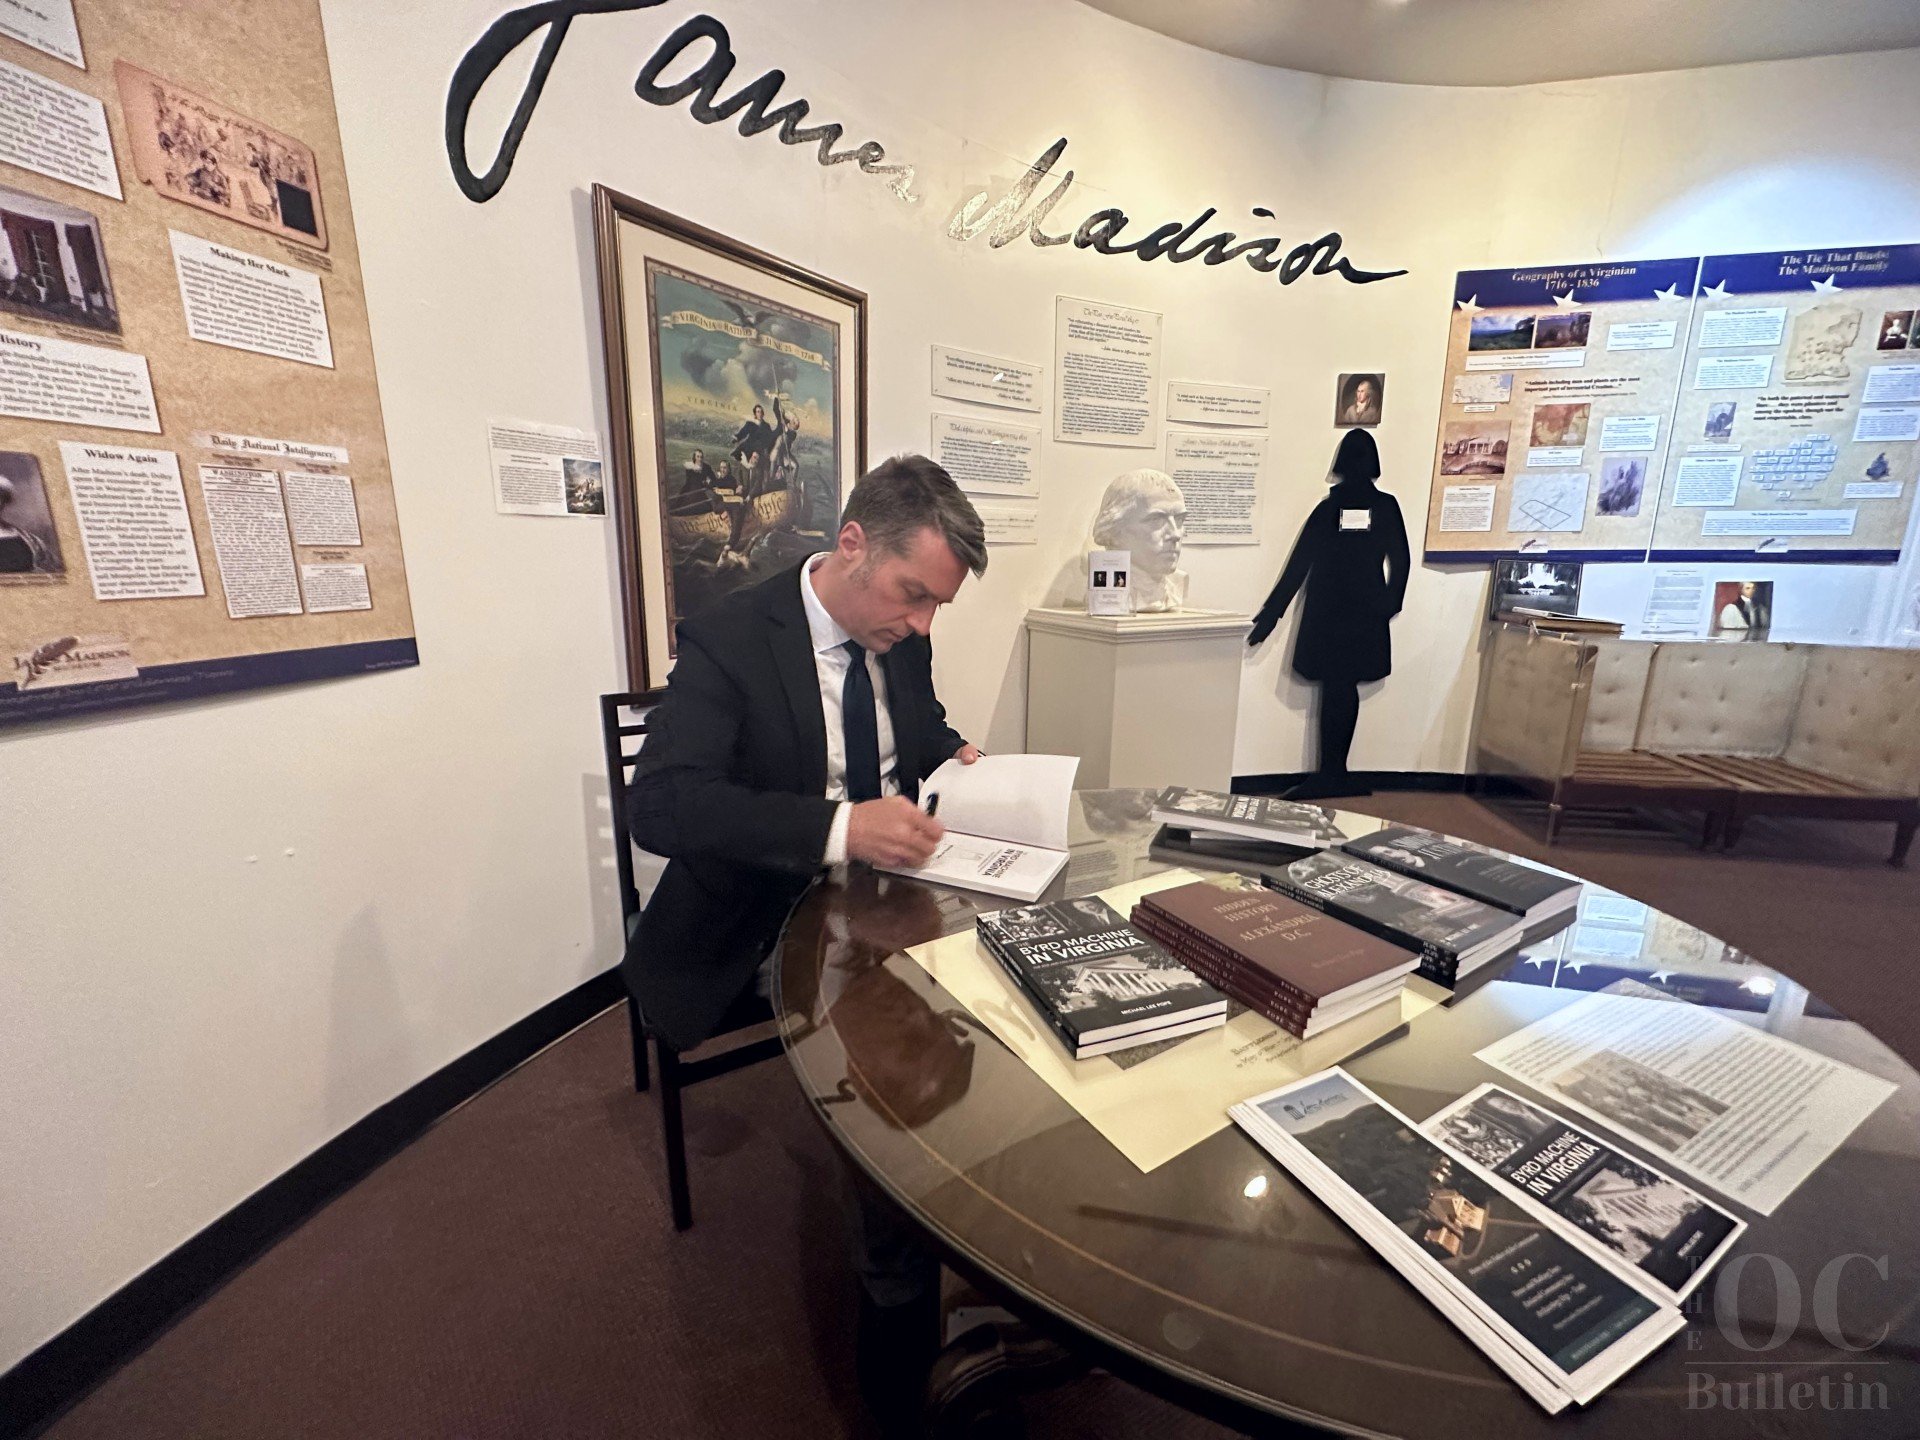  Award-winning journalist and author Michael Lee Pope signs a copy of his book at the James Madison Museum on Sunday, April 16. (Photo Credit: Adam Belmar) 